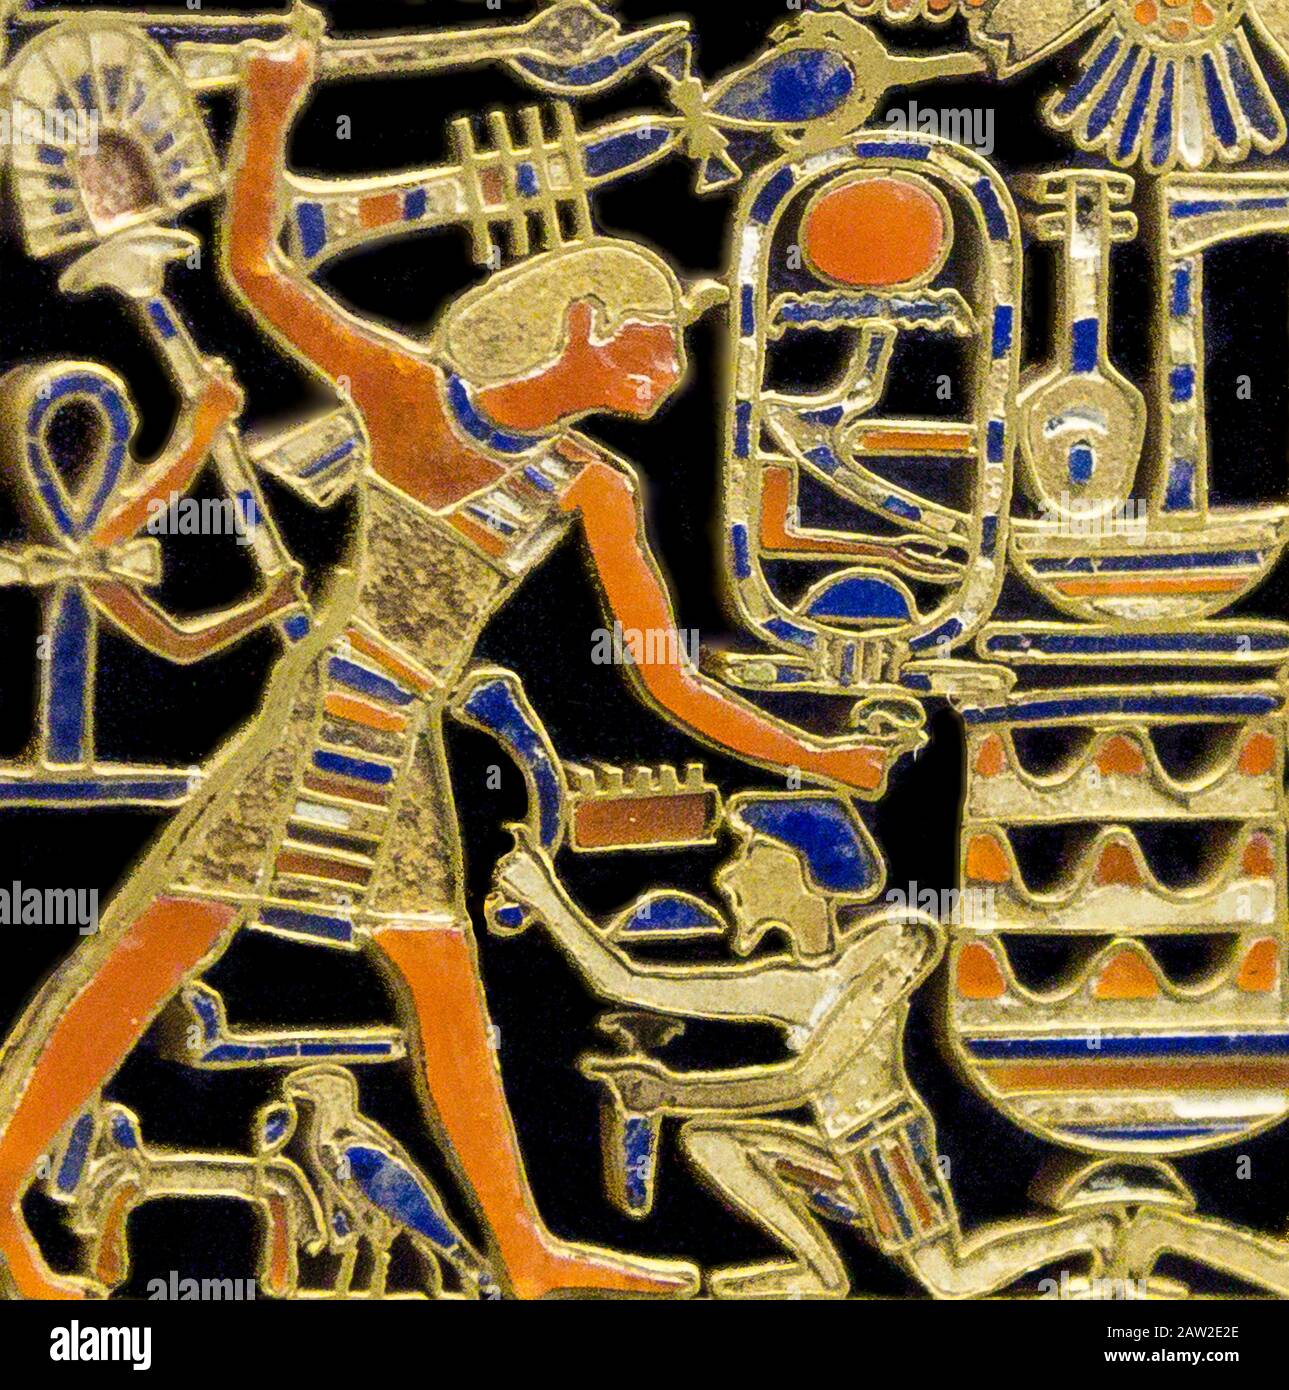 Egypt, Cairo, Egyptian Museum, from the tomb of Mereret, Dashur : Detail of a pectoral of Mereret, daughter of Sesostris 3 and sister of Amenemhat 3. Stock Photo